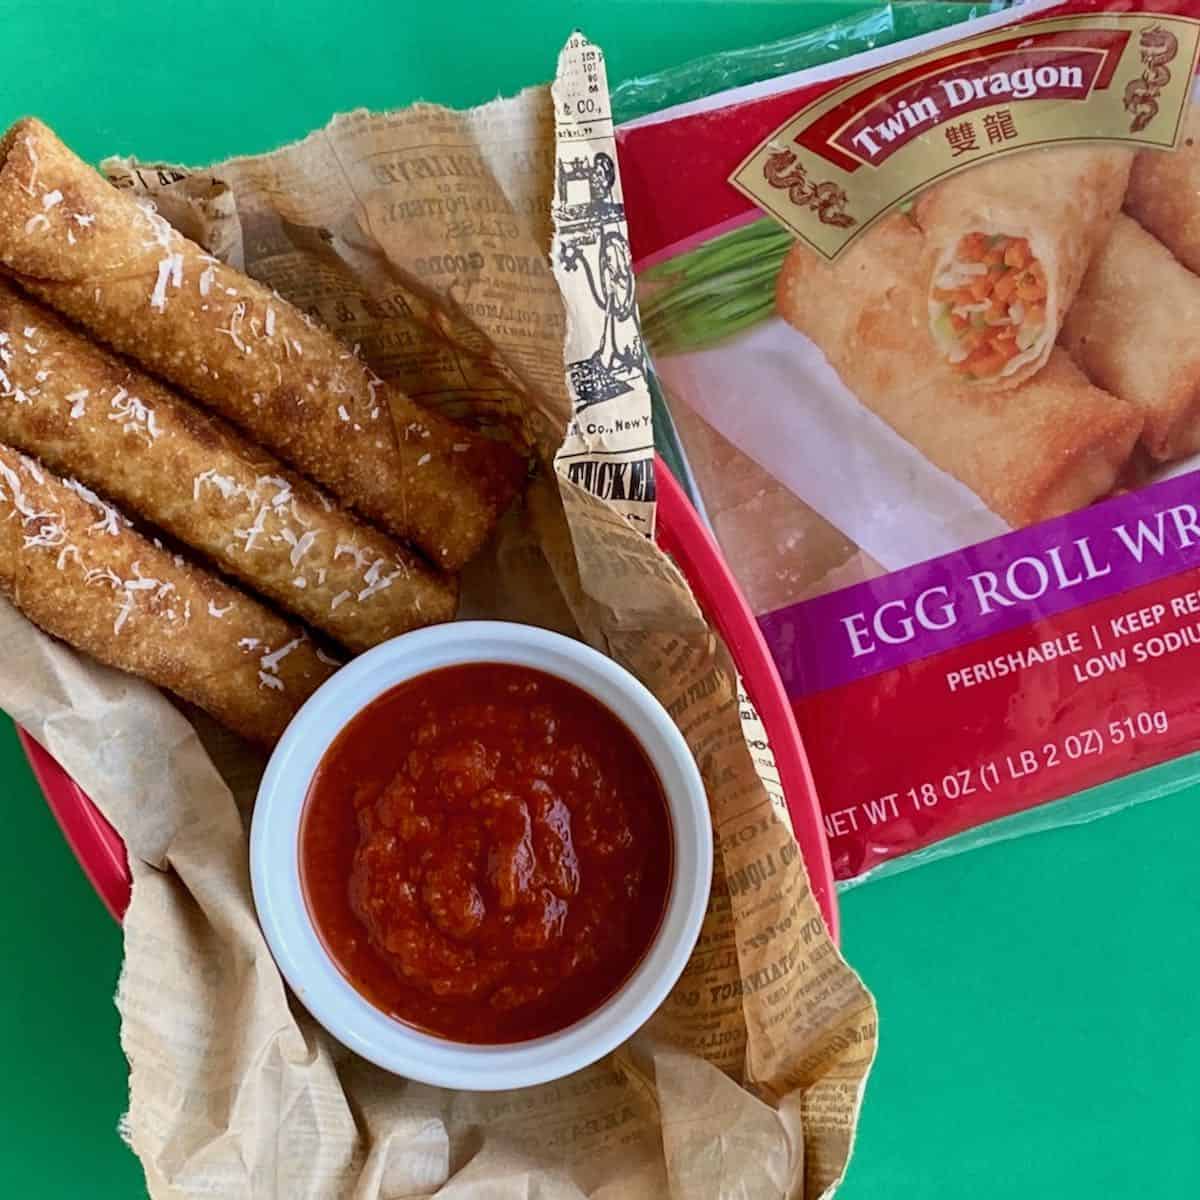 over head view of egg rolls in a paper lined basket with product package